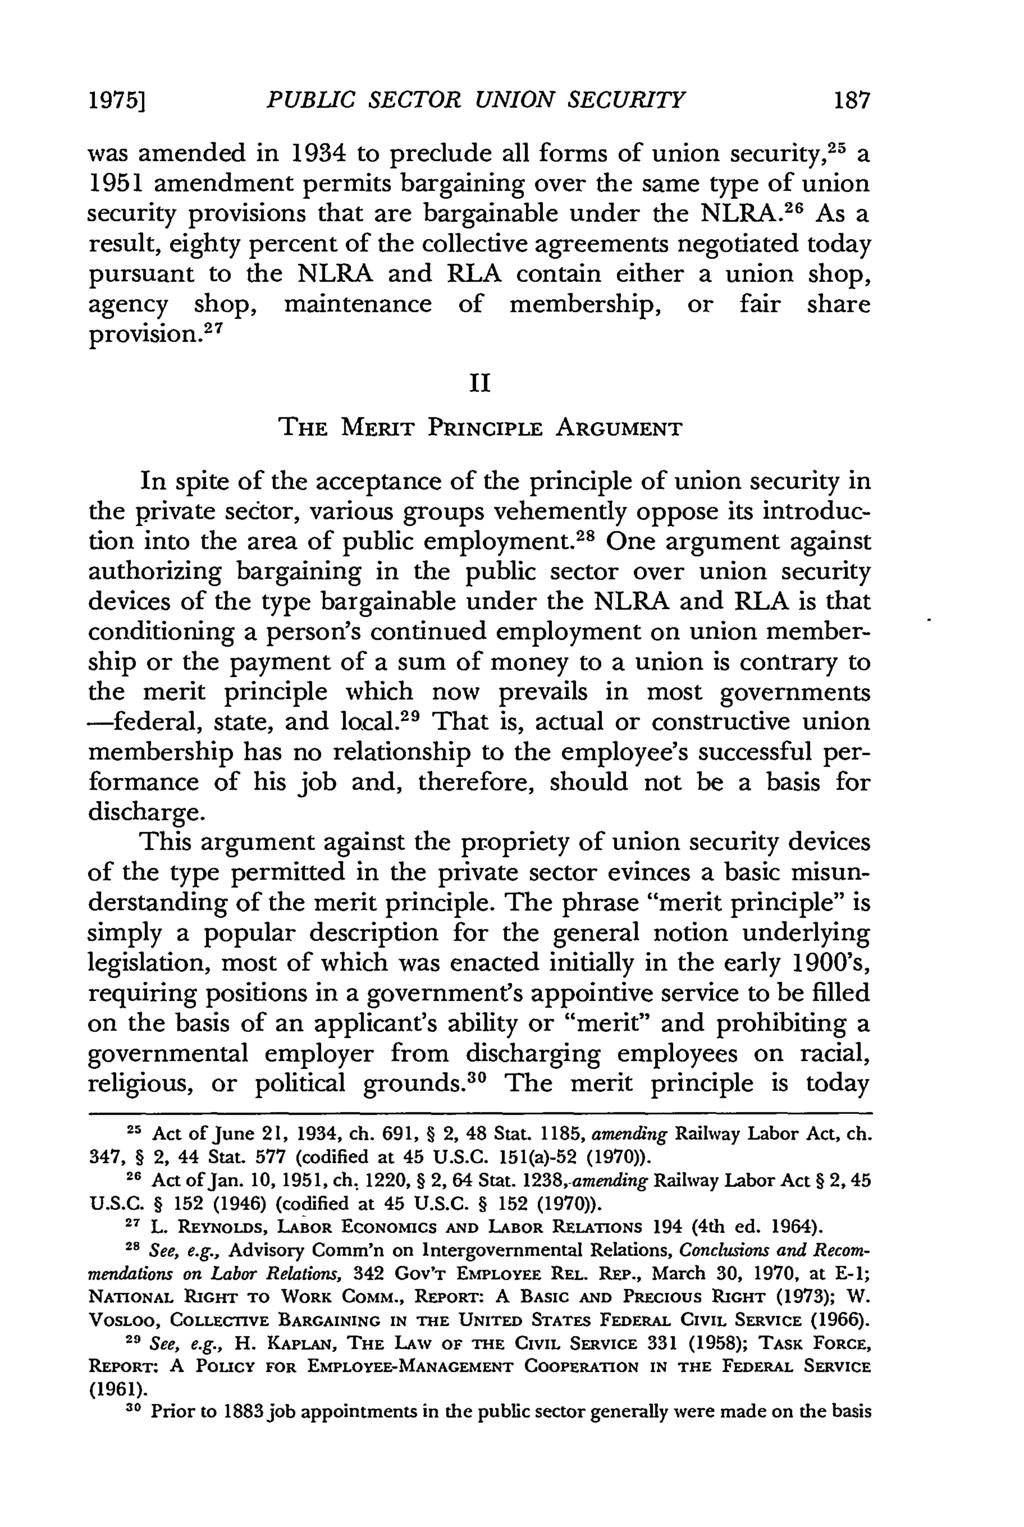 19751 PUBLIC SECTOR UNION SECURITY was amended in 1934 to preclude all forms of union security, 25 a 1951 amendment permits bargaining over the same type of union security provisions that are